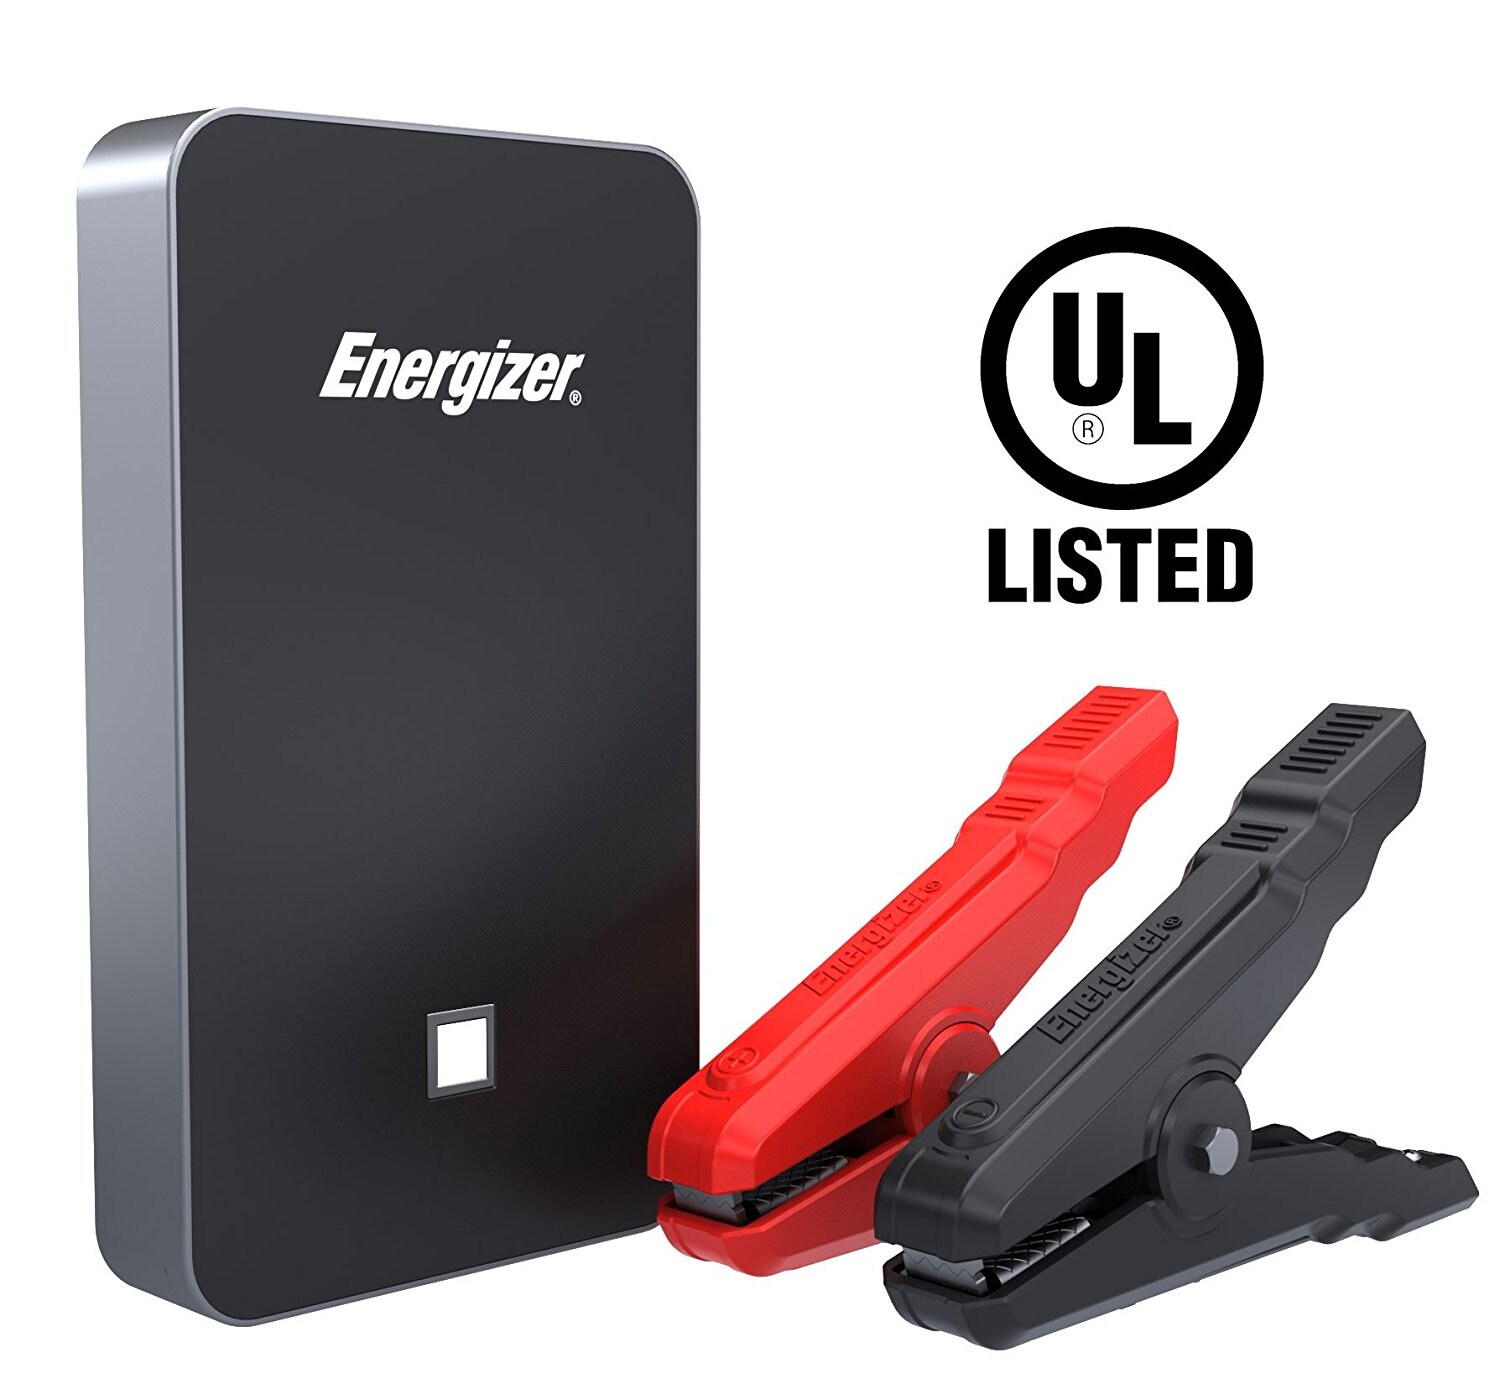 400A FREE POSTAGE Energizer Lithium-Ion Polymer Car Jump Starter & Power Bank 